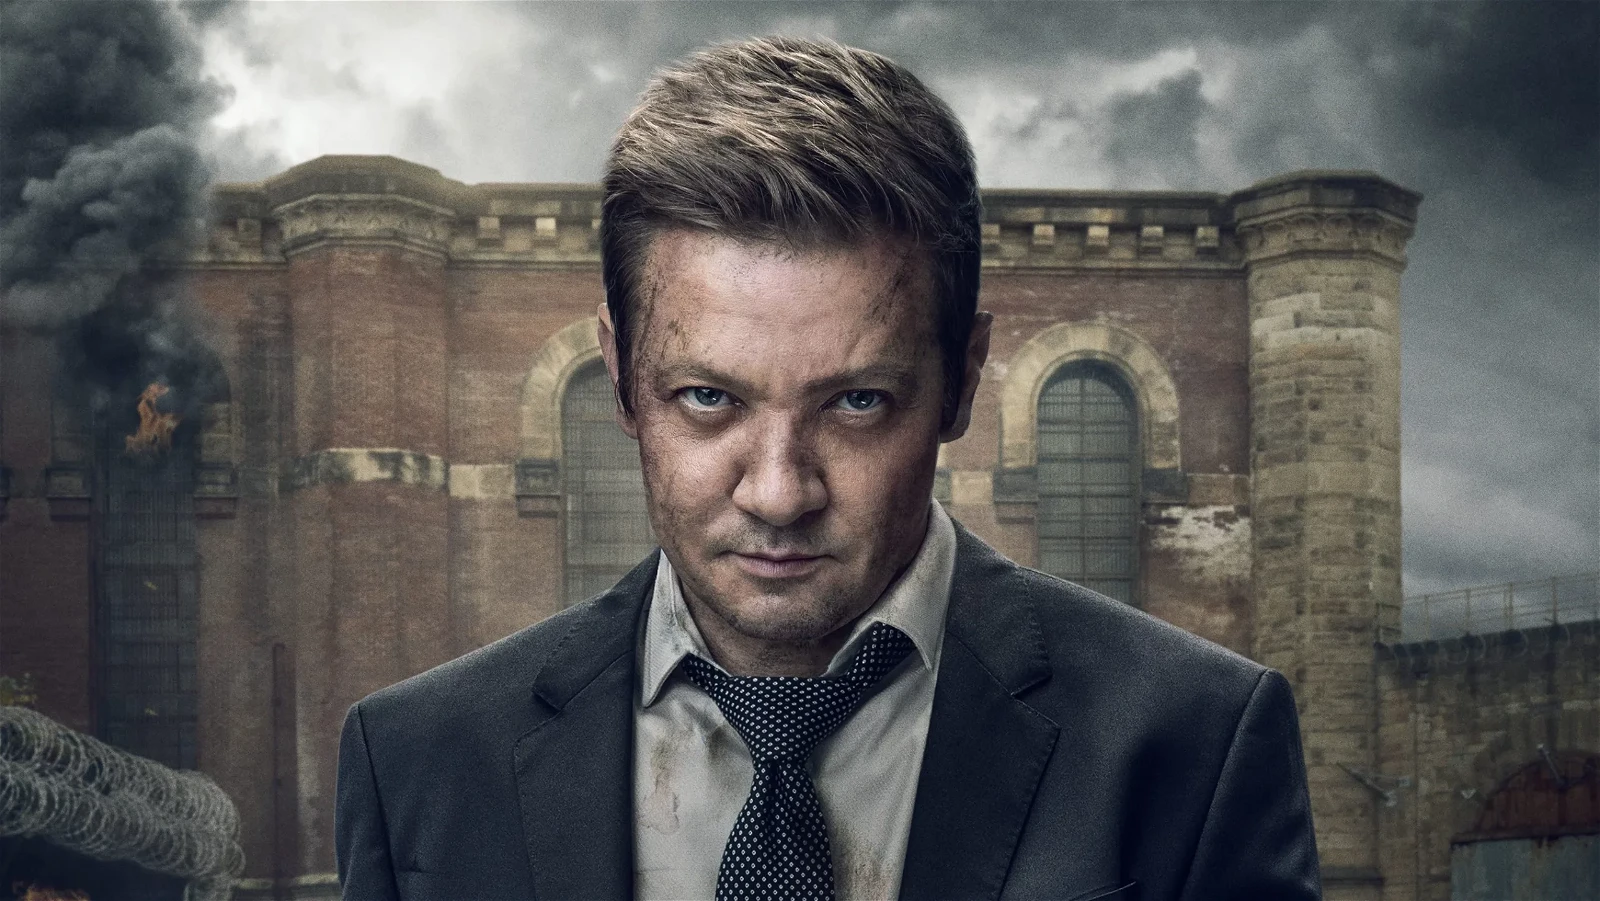 Jeremy Renner's face has been tweaked in this updated poster.